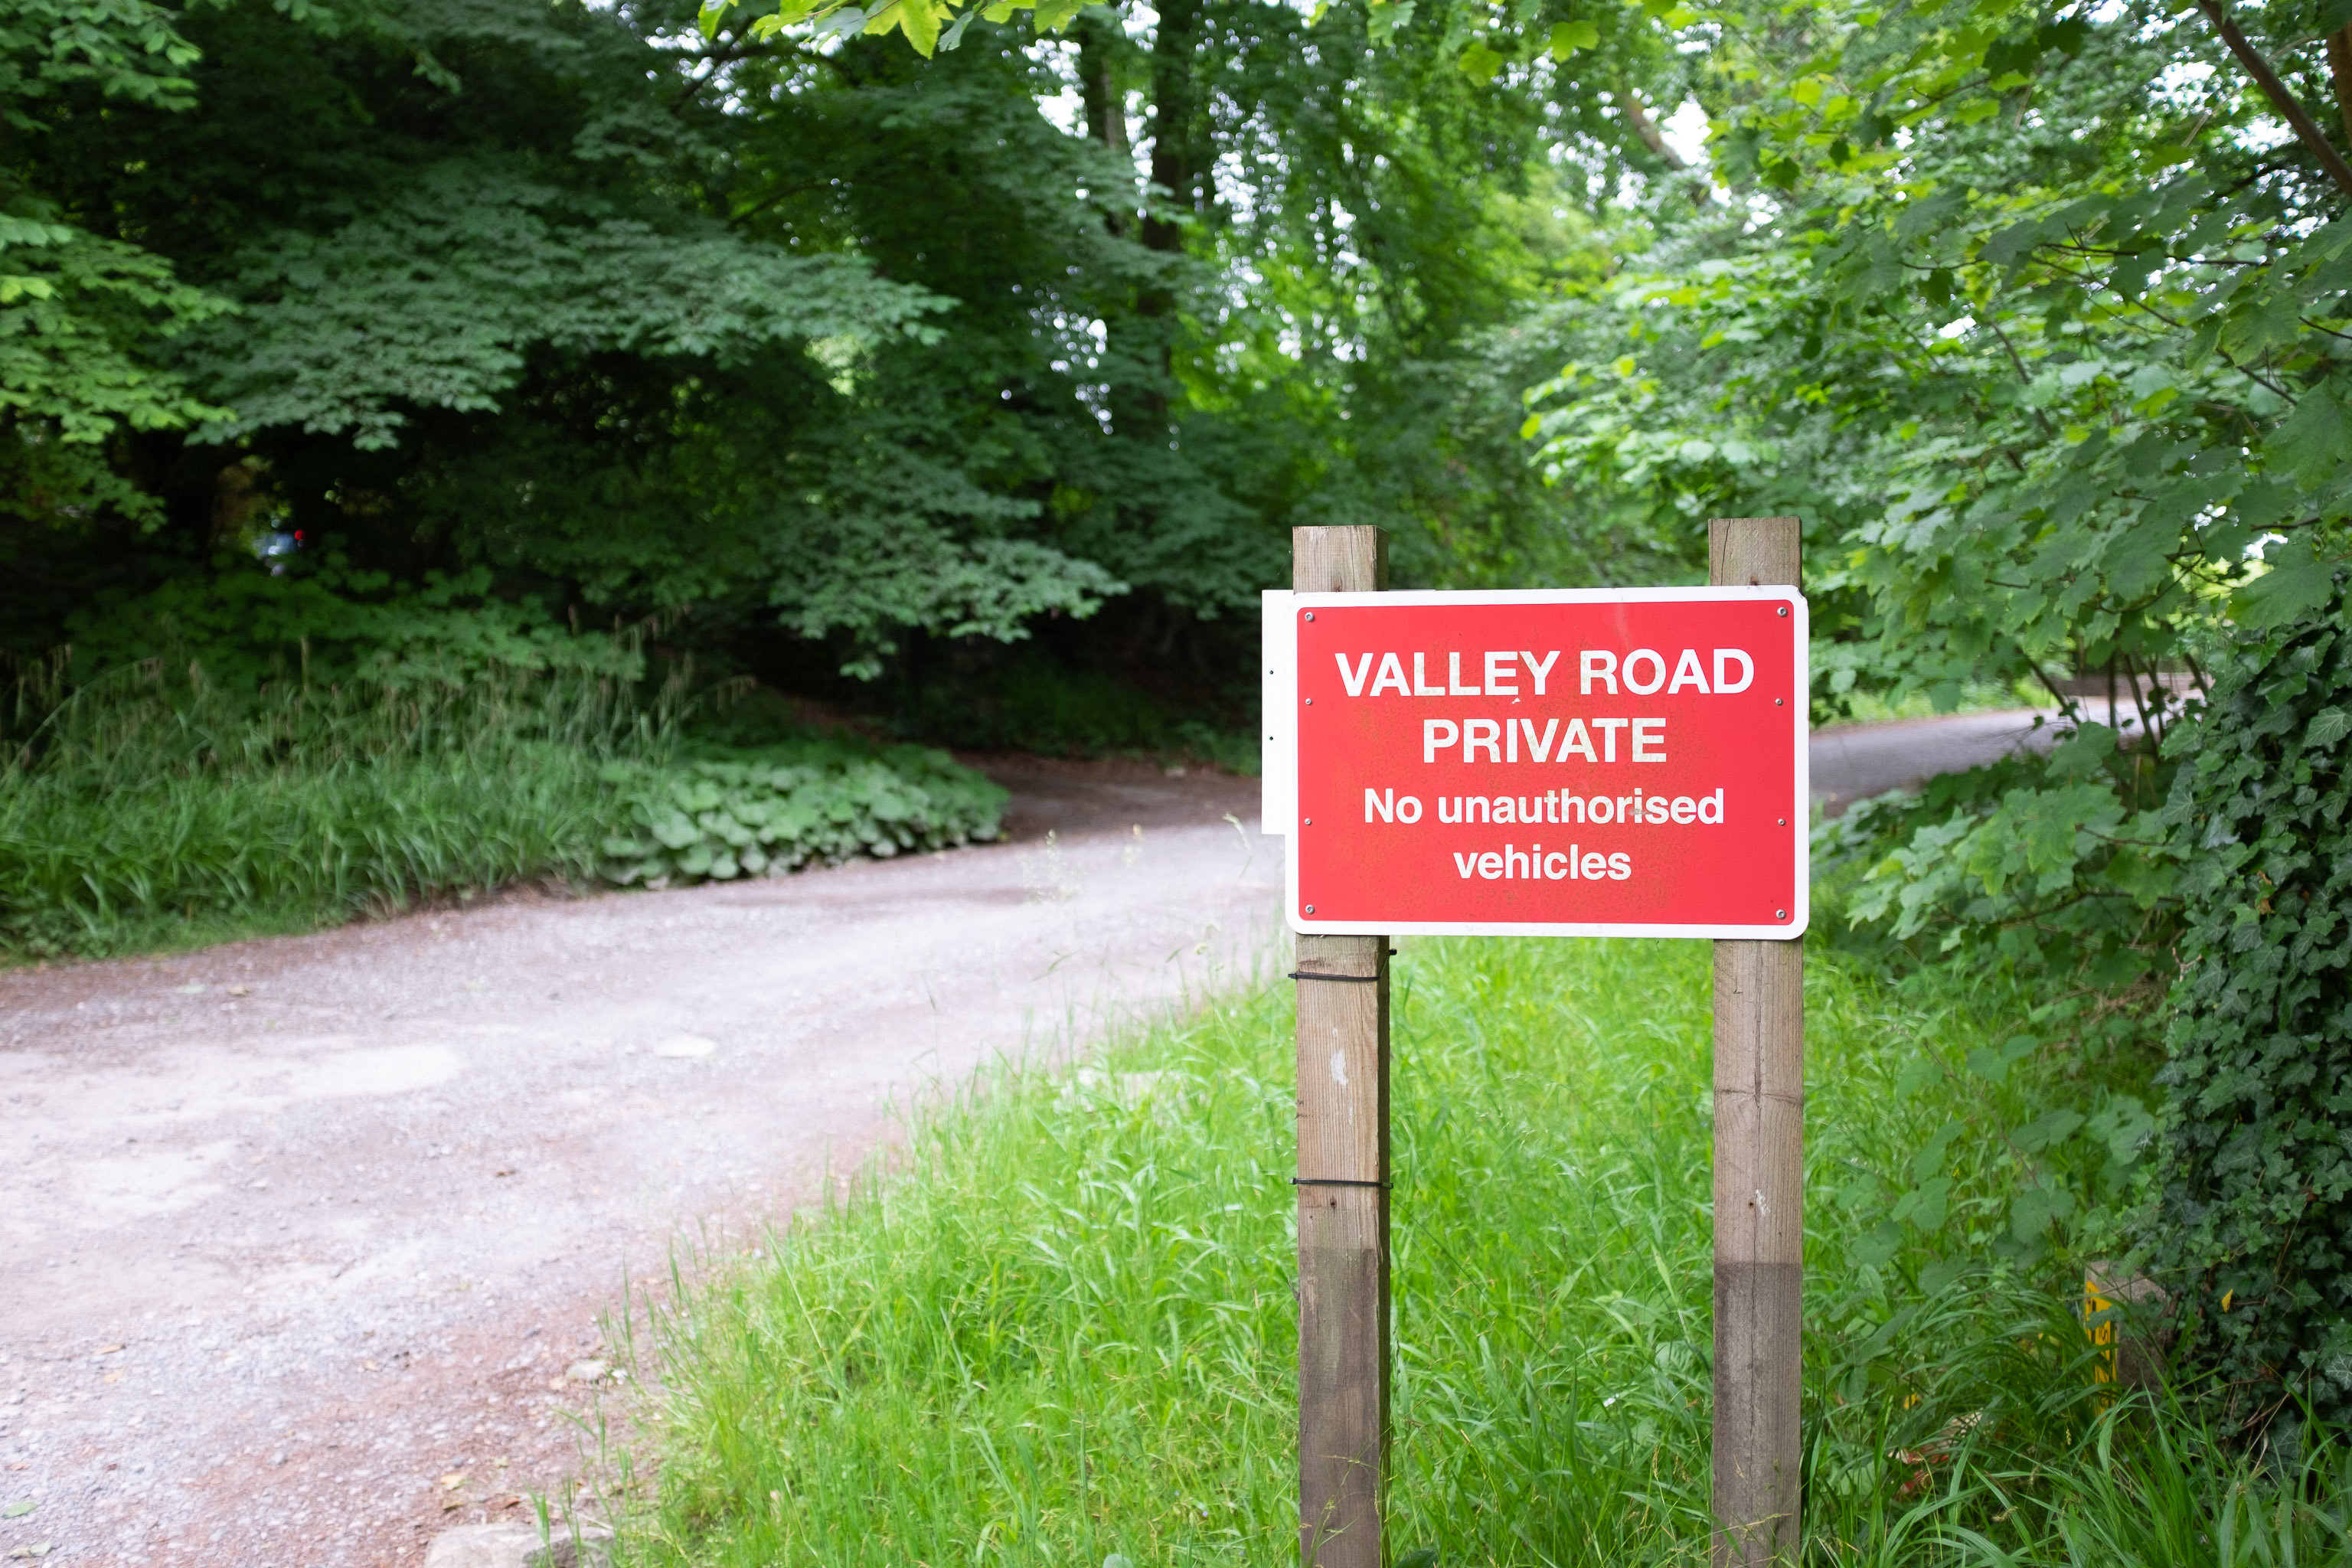 PRIVATE
But plenty of people seemed to be cutting through, so I imagine the sign is more intended to stop it turning into a car park. I think the Forstry C...